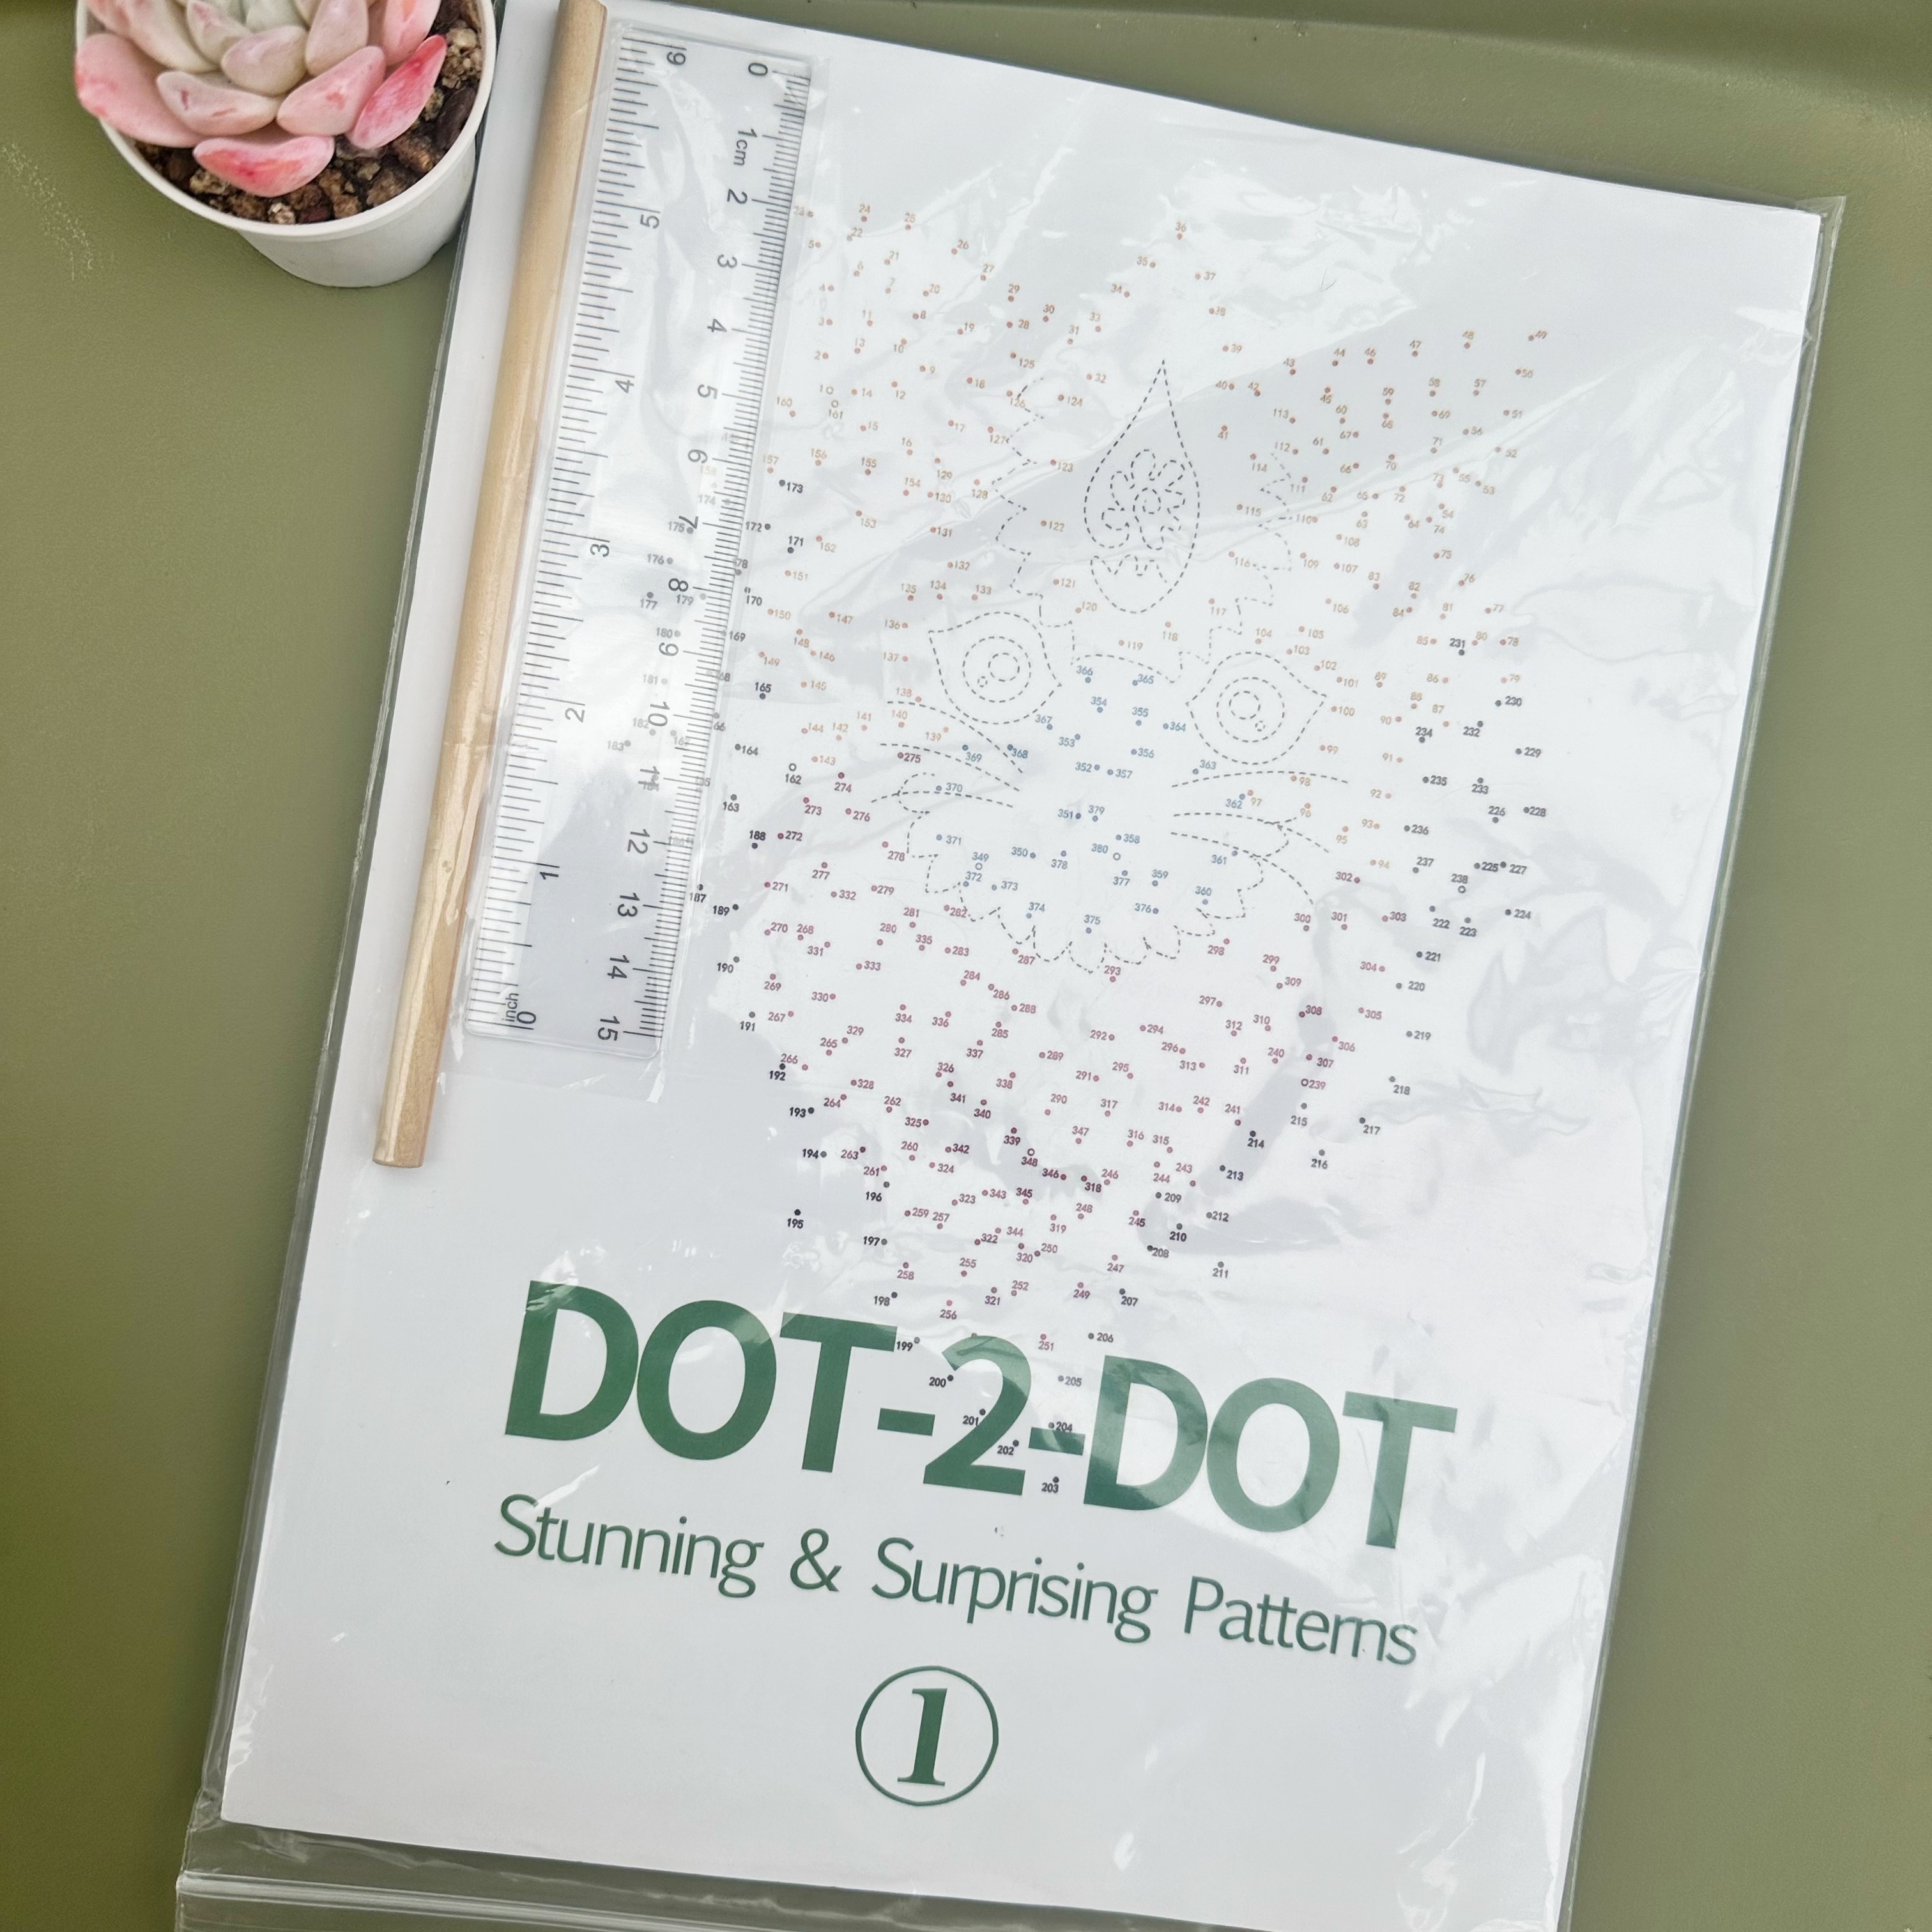 

1 Book Dot To Dot For Adults Fun And Challenging Join The Dots: The Mindful Way To Relax And Unwind (with 26 Pictures And Over 10, 000 Dots To Connect! )